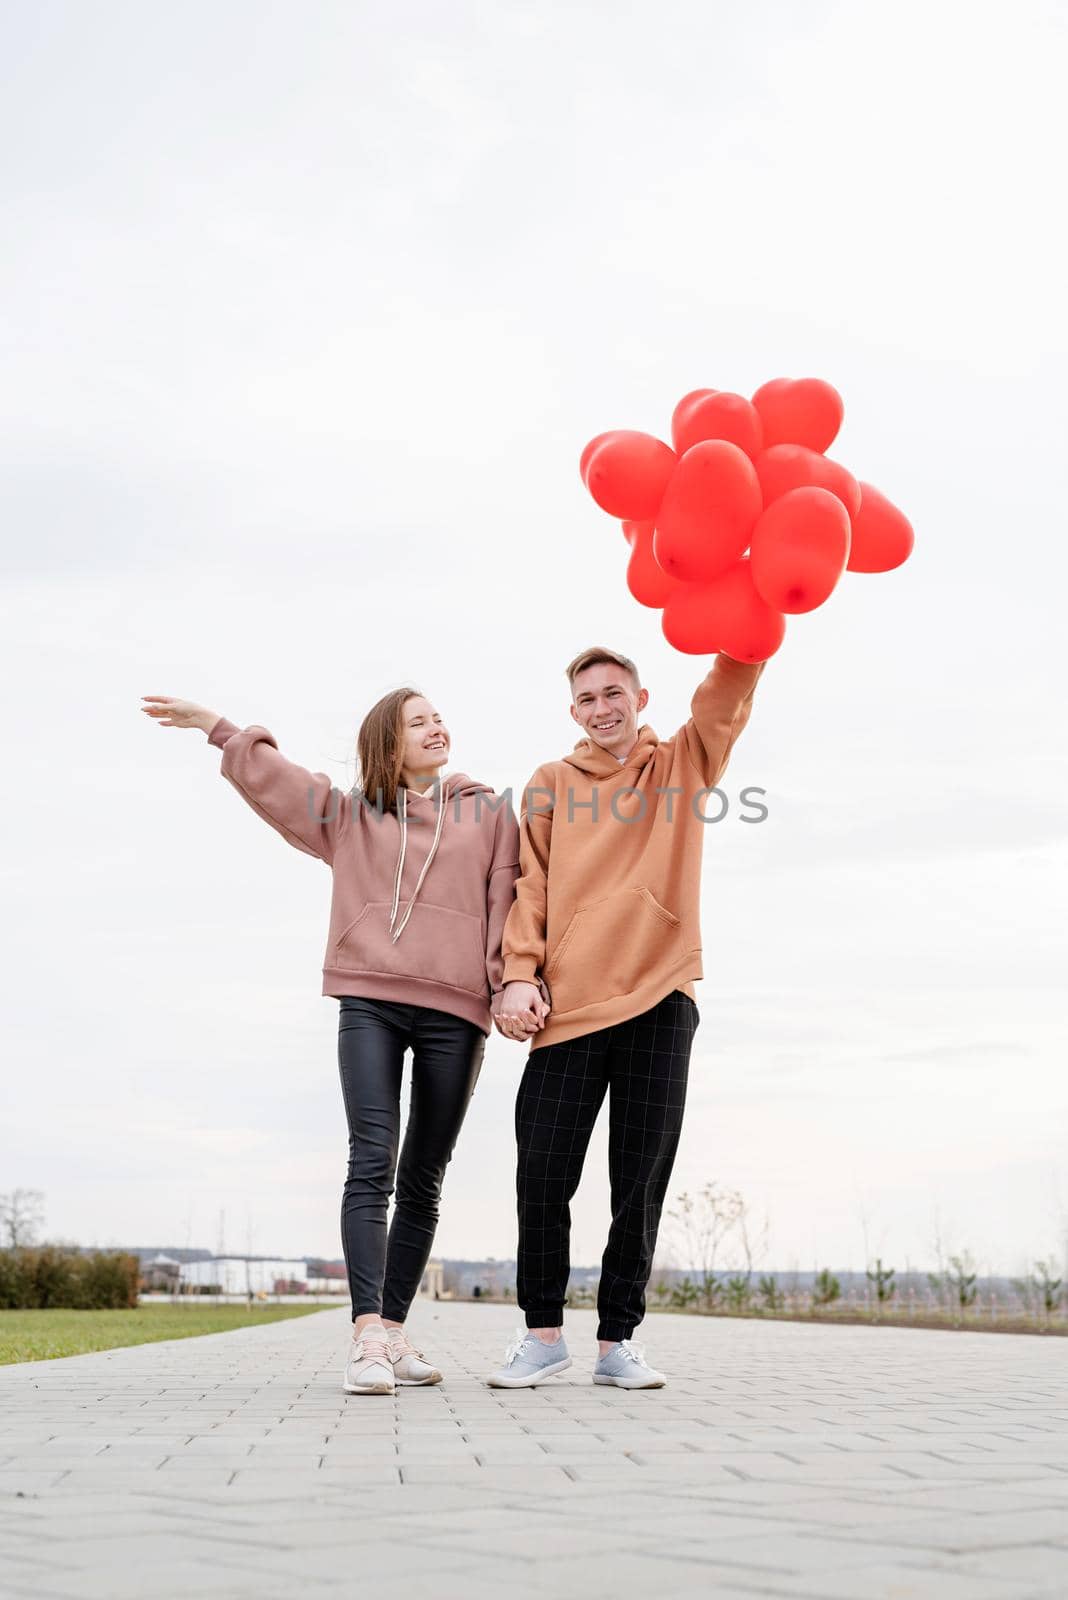 Valentines Day. Young loving couple hugging and holding red heart shaped balloons outdoors